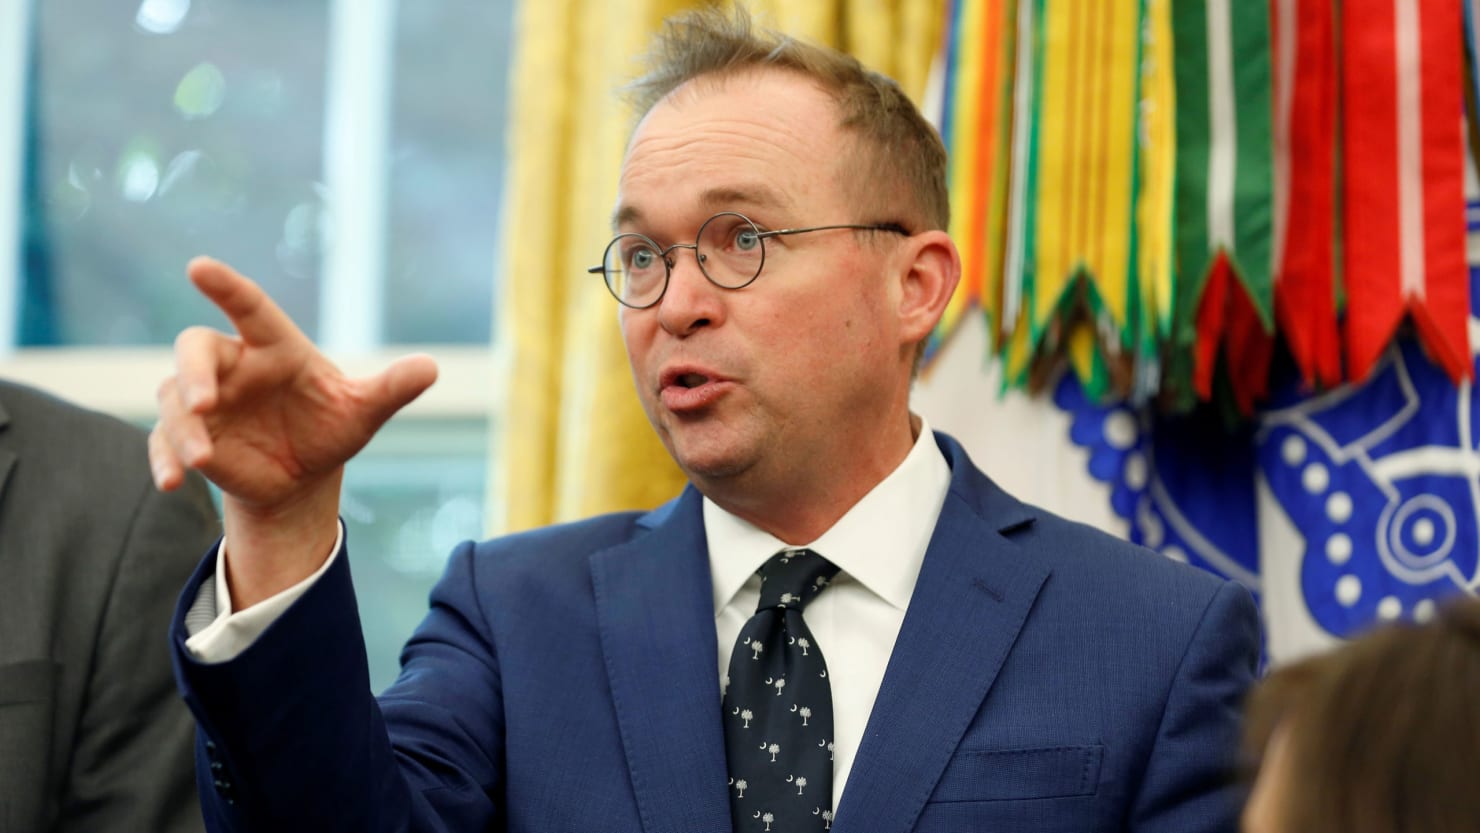 Incoming Chief of Staff Mick Mulvaney: ‘Very Possible’ Shutdown Could Go into 2019